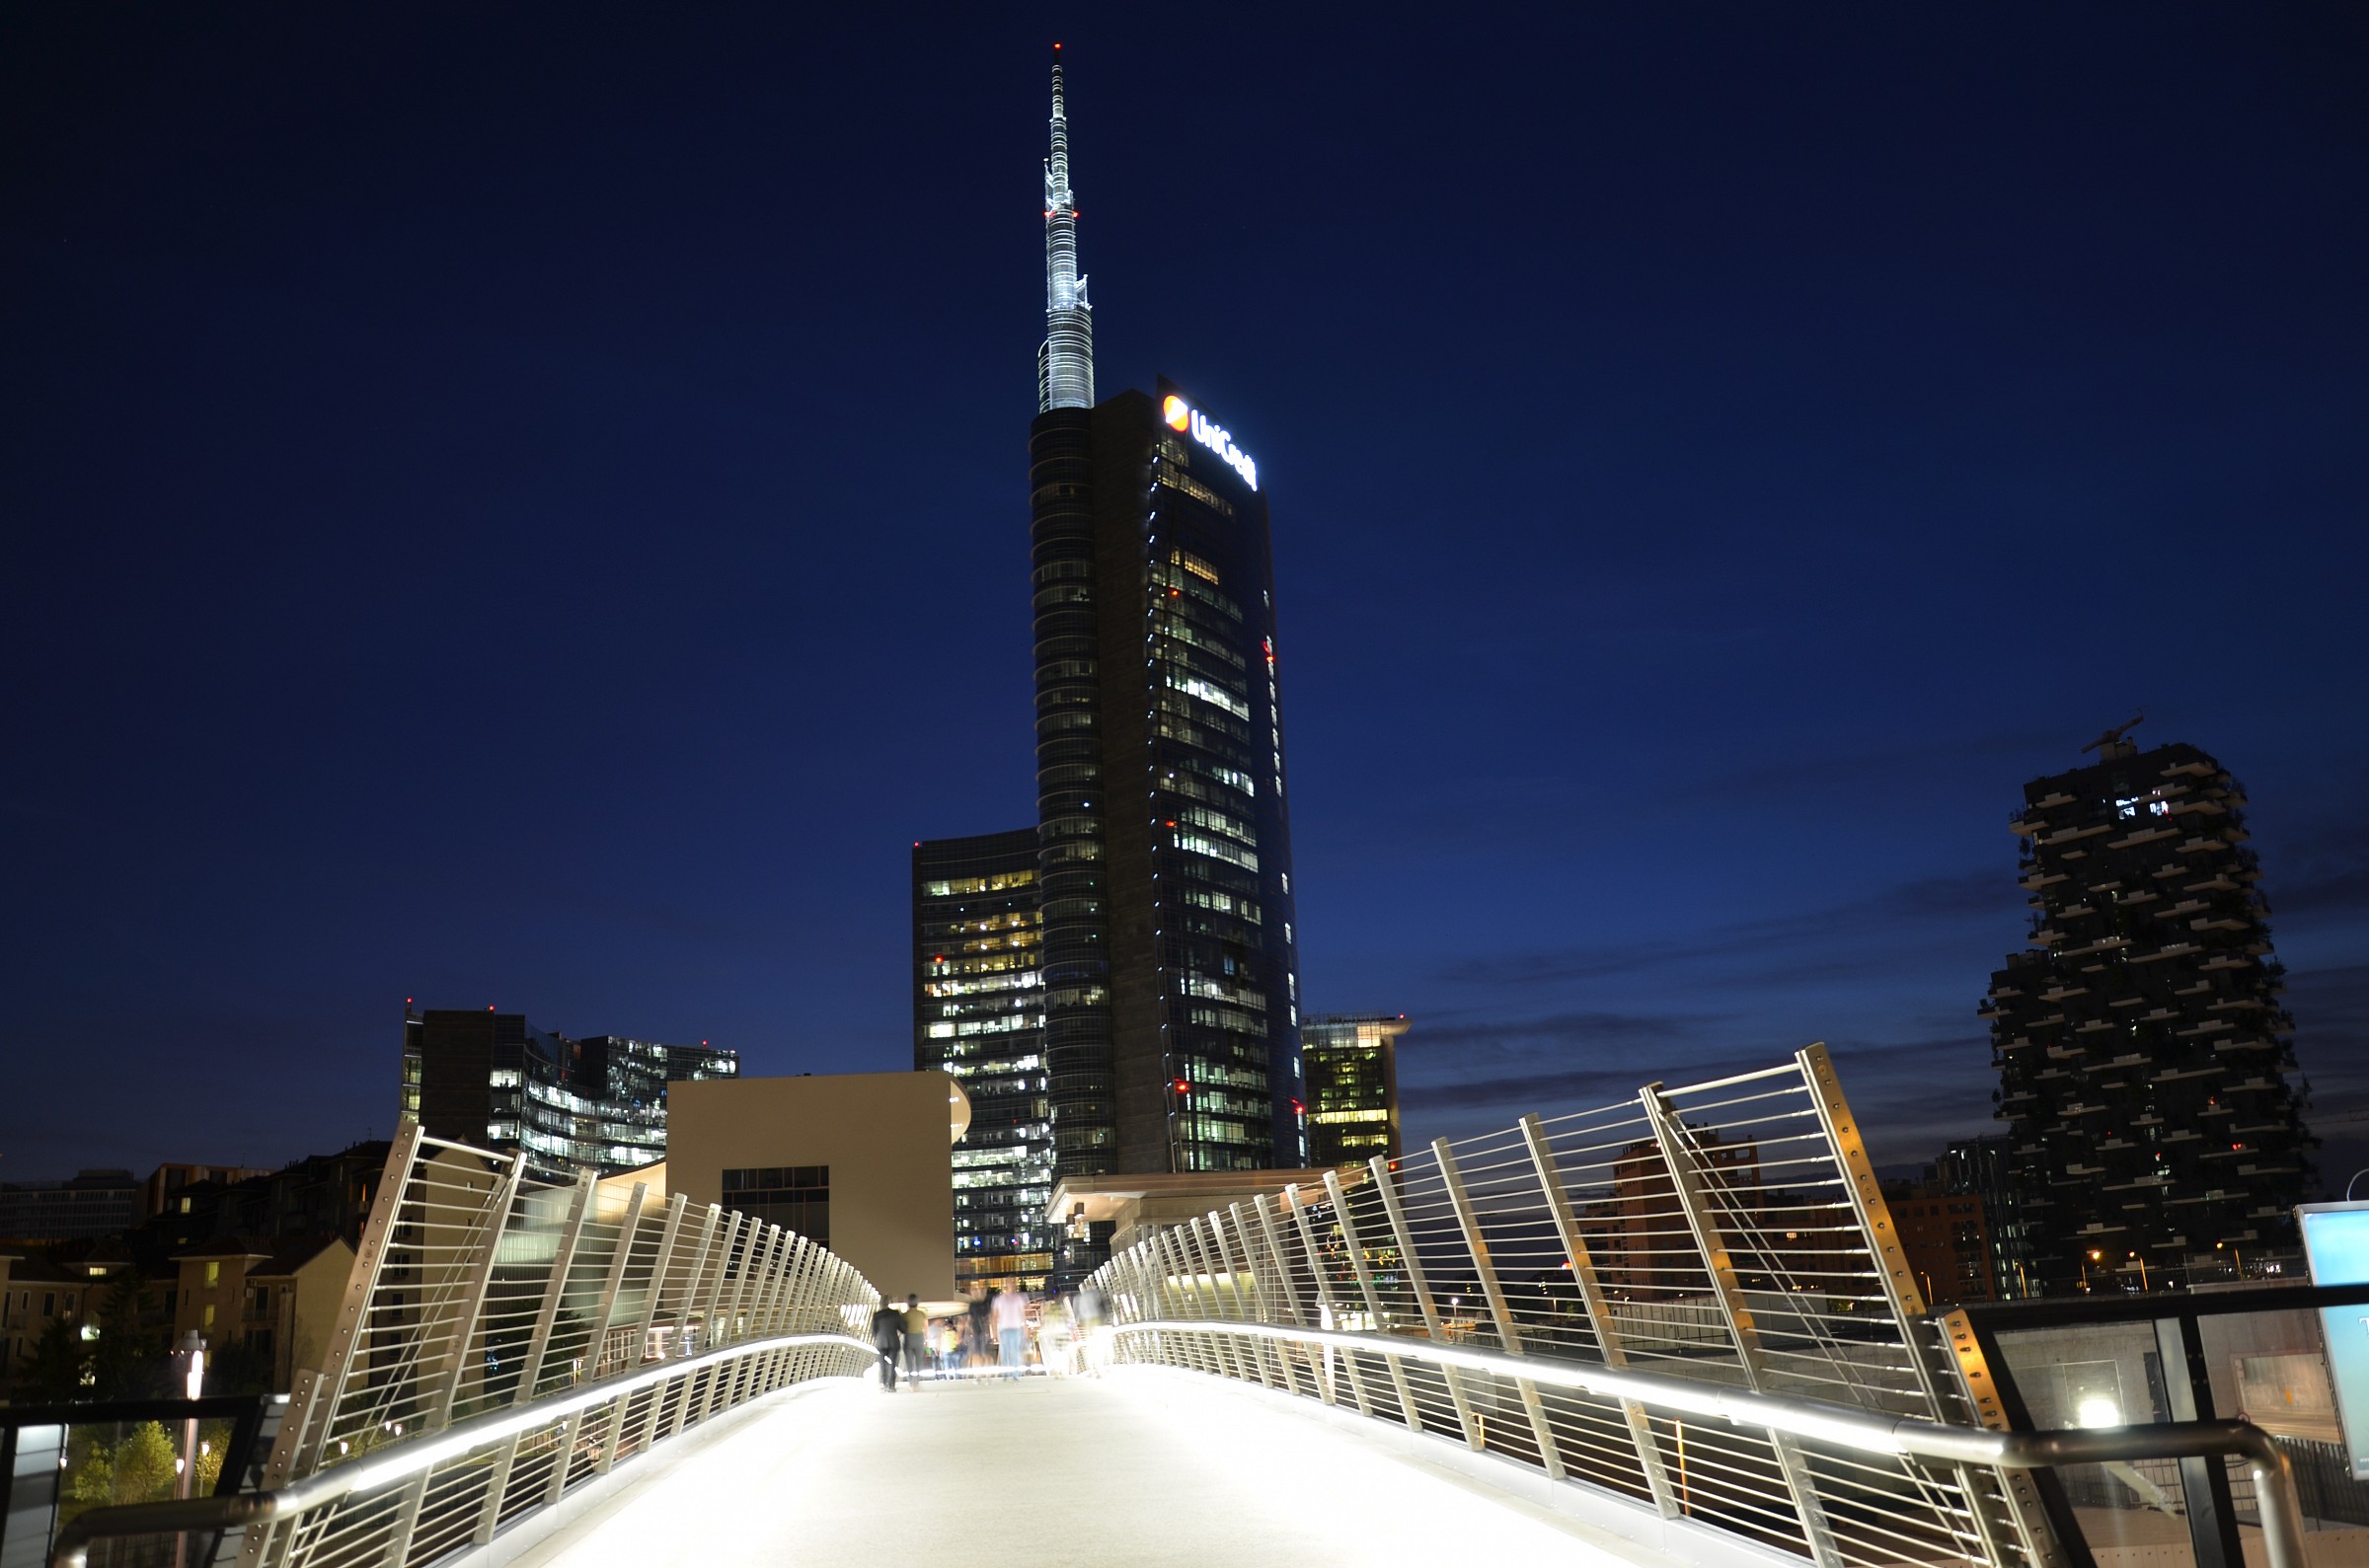 Unicredit Tower by night...